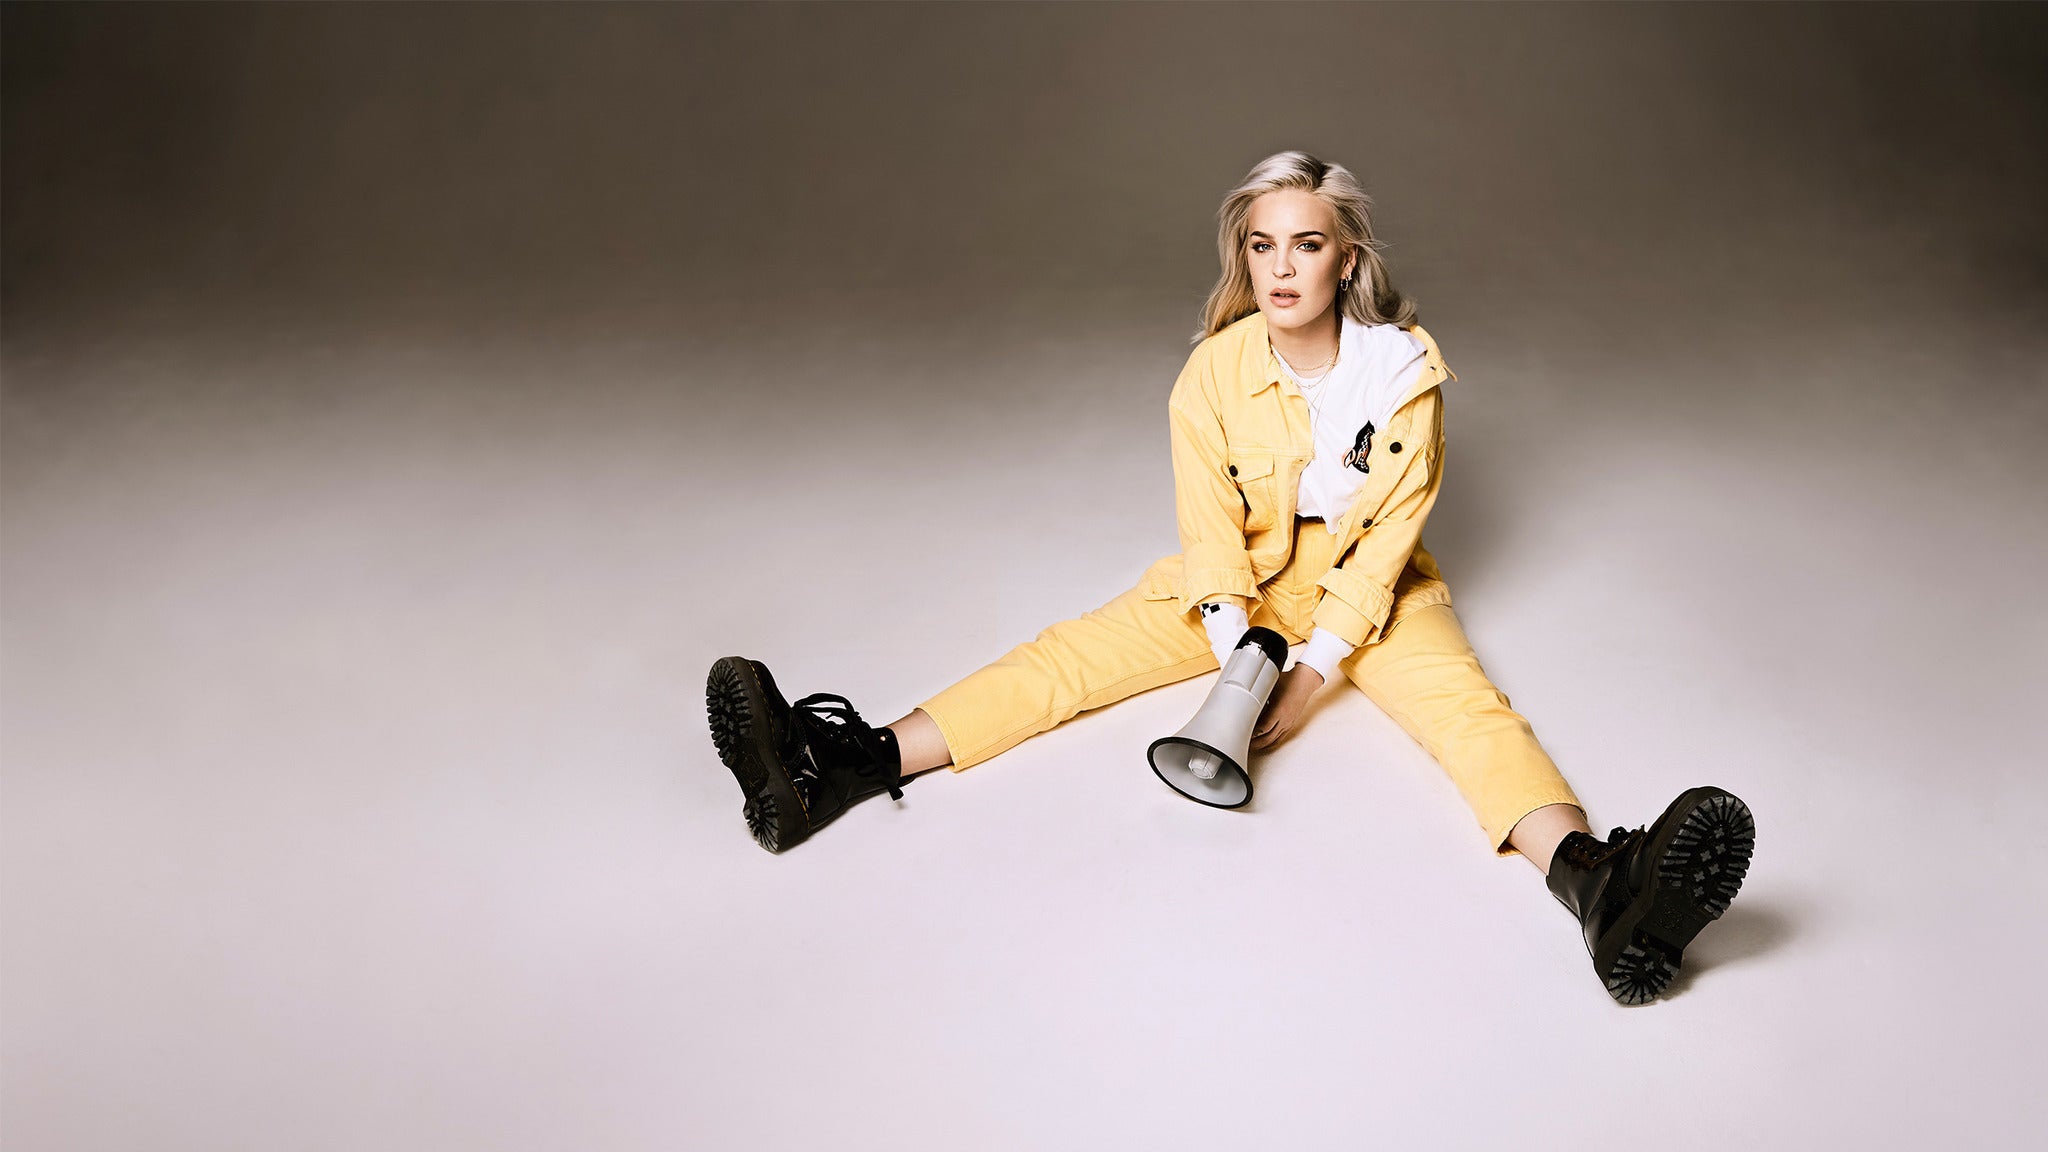 Anne-Marie 2022 Concerts